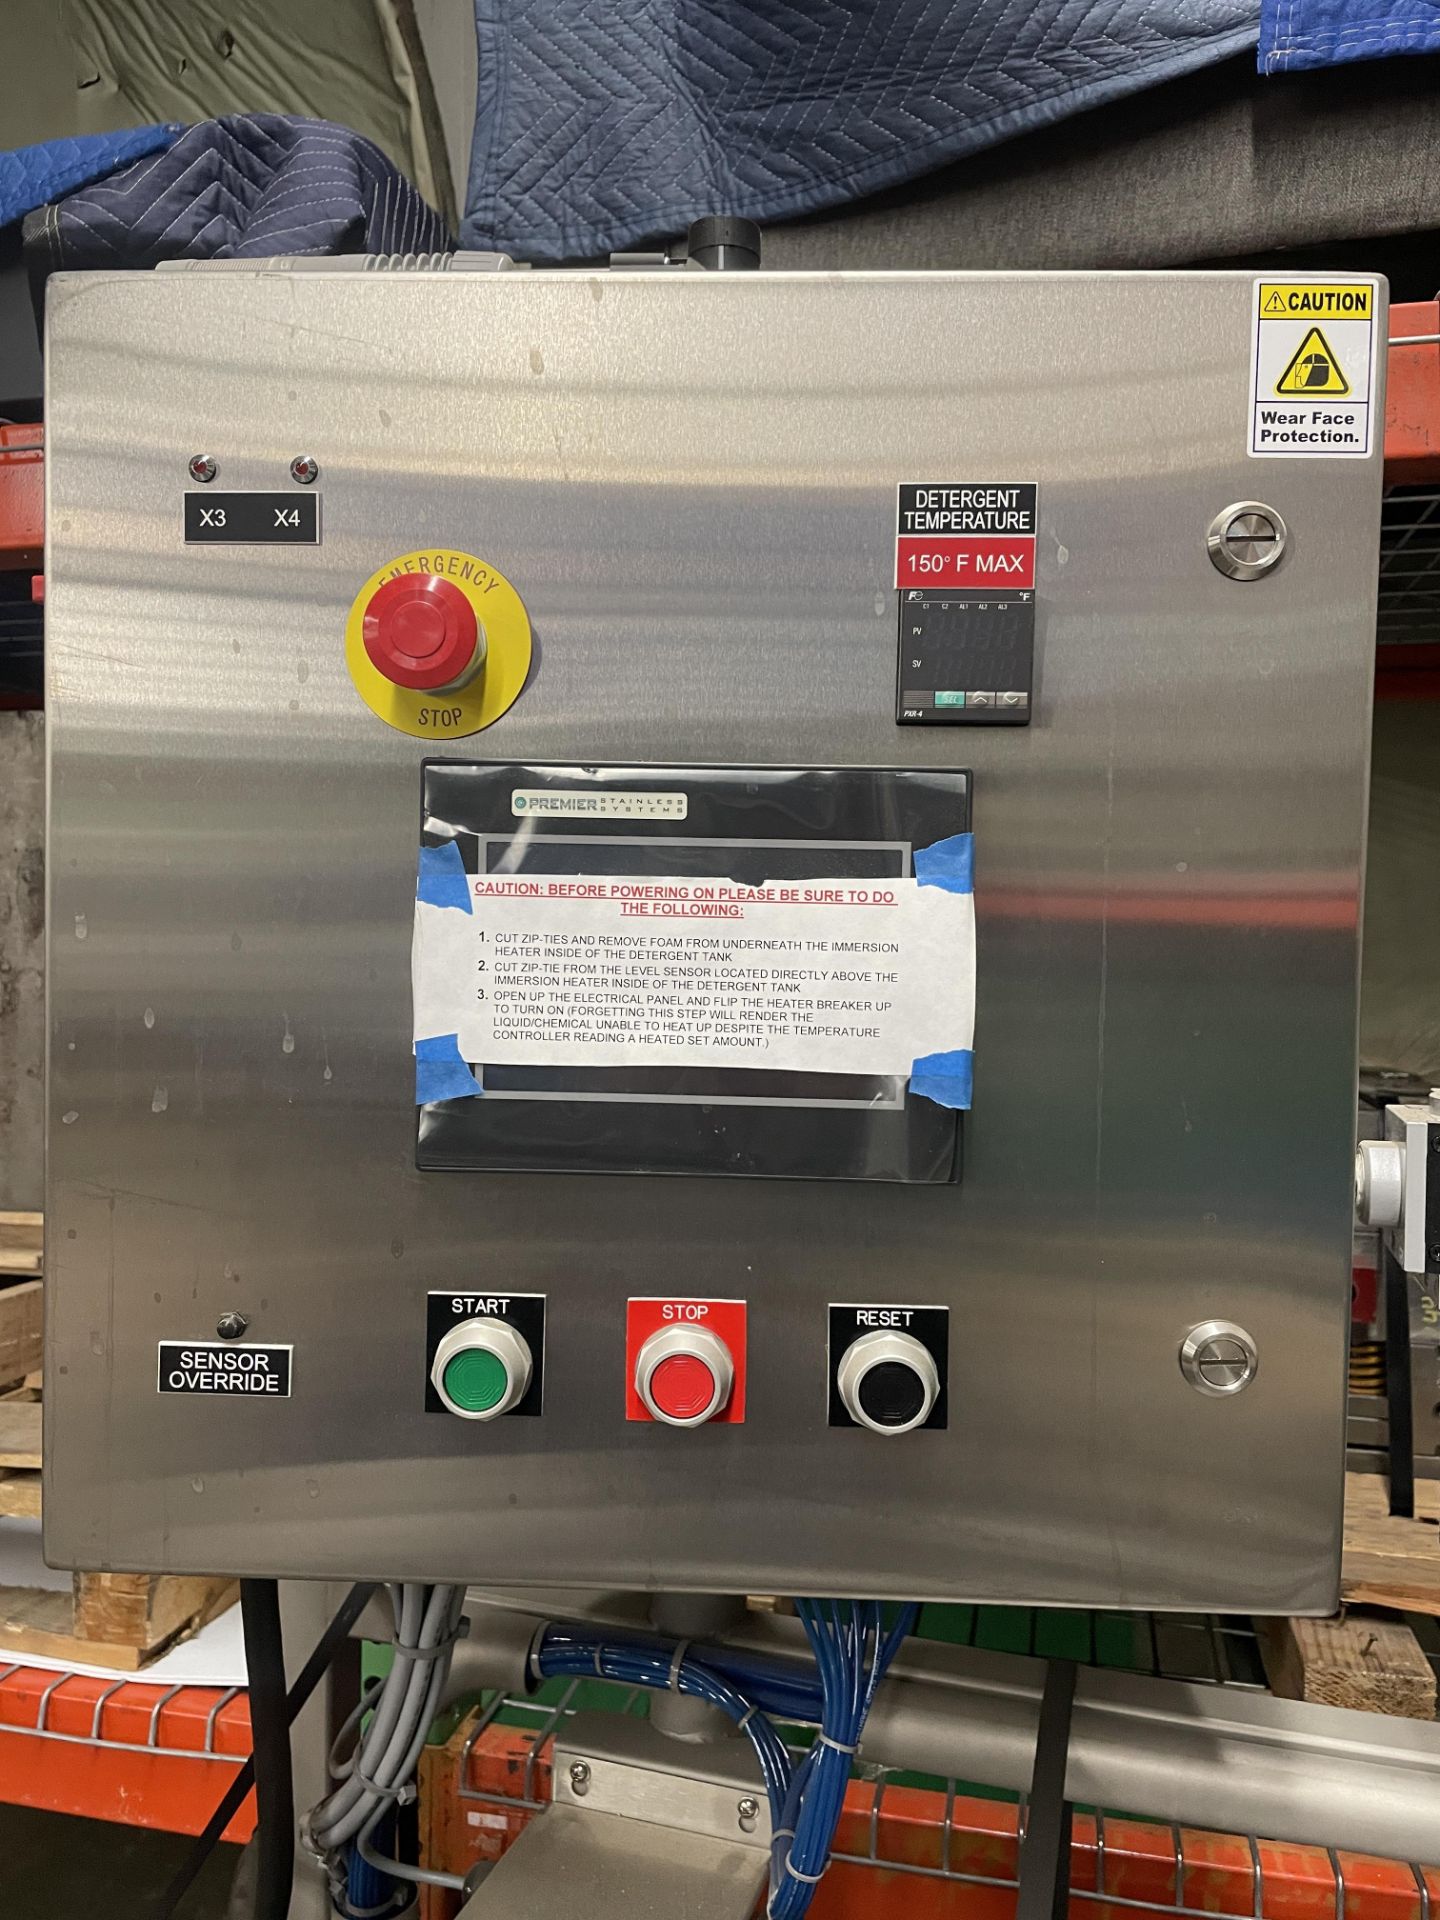 2020 Premier #KW-SA-3V-CS-A 3 Head Stainless Keg Washer, 3 Phase, 208-230VAC, 60Hz, S/N: 20KW019 (Se - Image 3 of 17